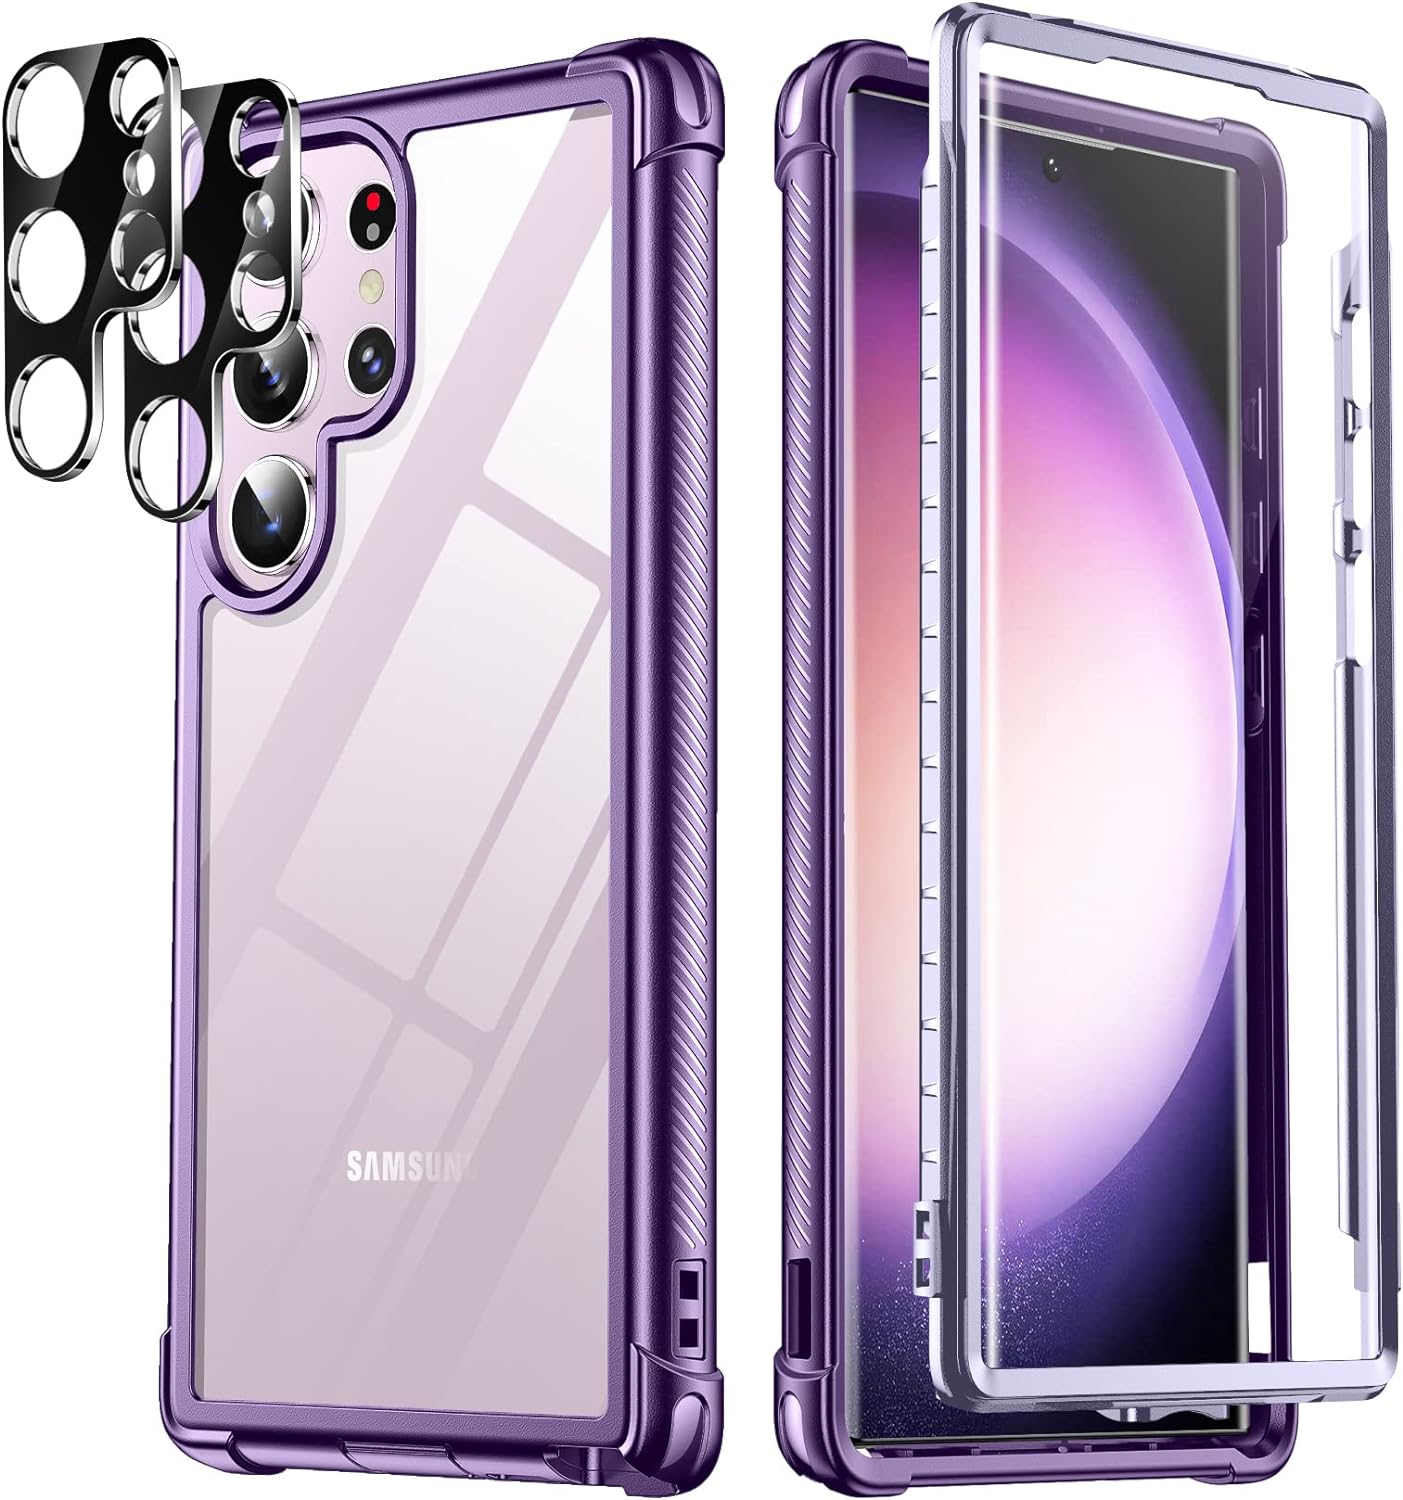 Temdan for Samsung Galaxy S23 Ultra Case, [Built-in Screen Protector] [2Pcs Lens Protector][Touch Sensitive][Anti-Scratch][Military Grade Shockproof] Full Body Protection Case for S23 Ultra 5G,Purple